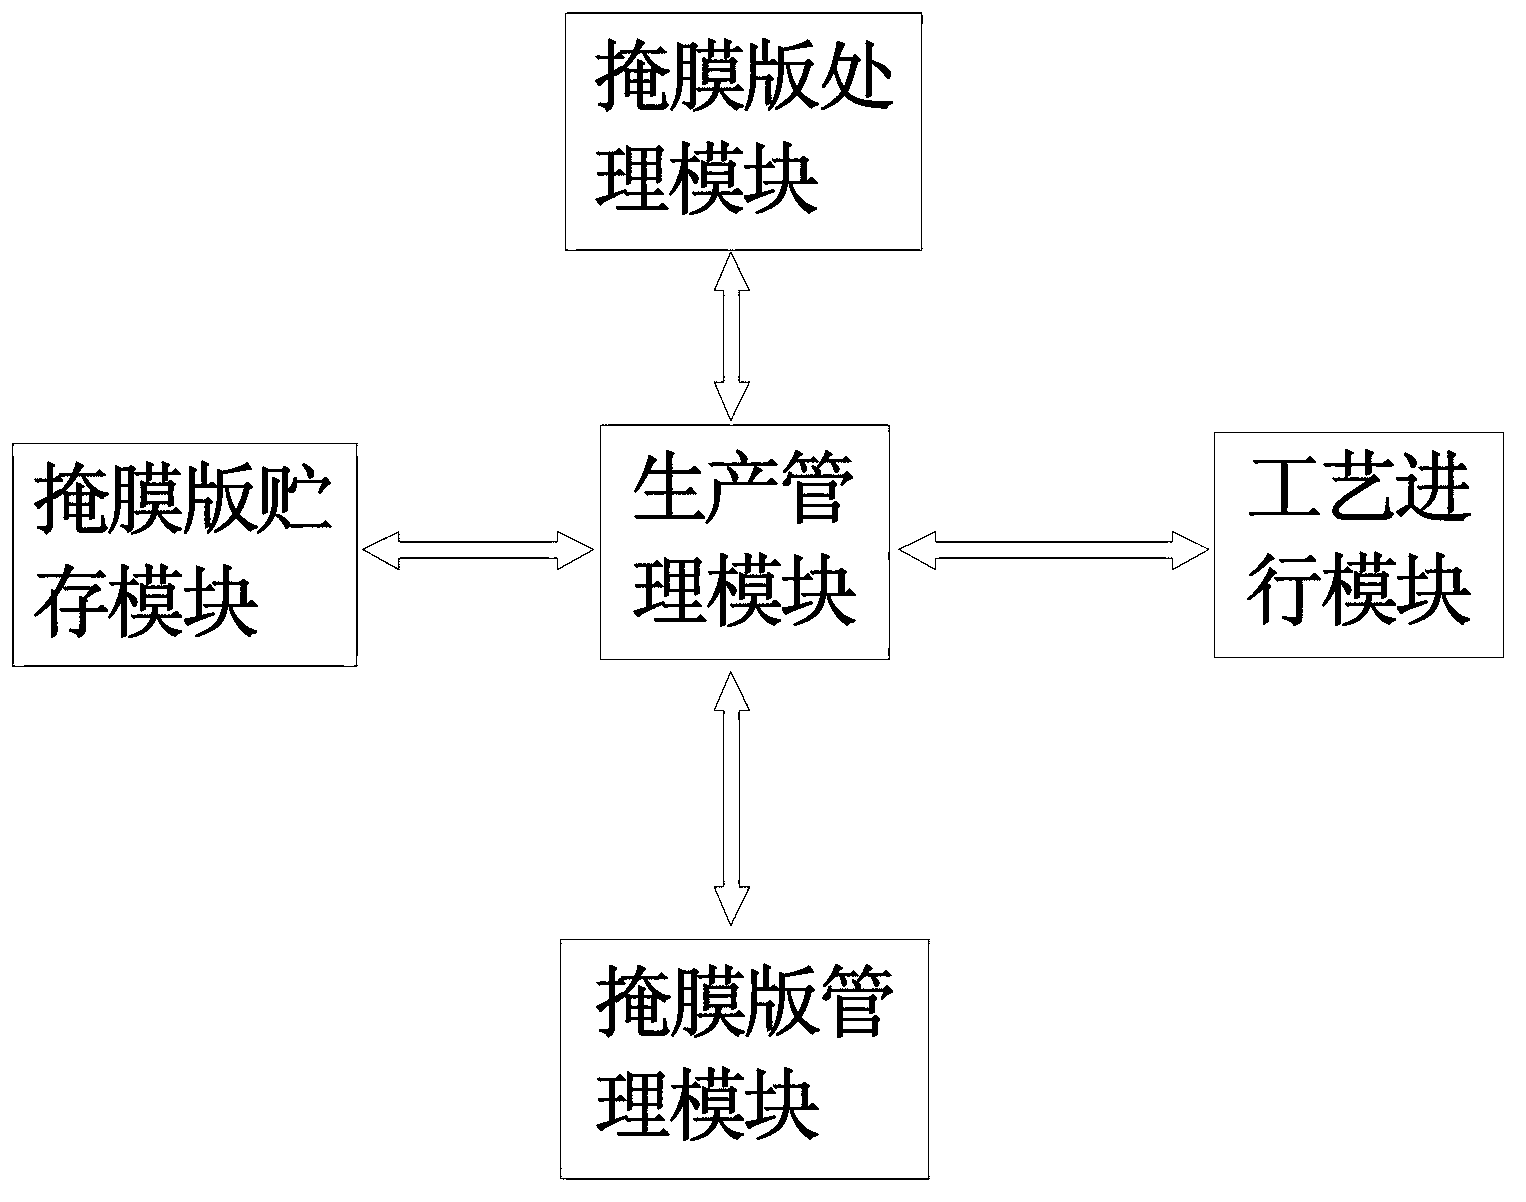 Automated mask management system and method